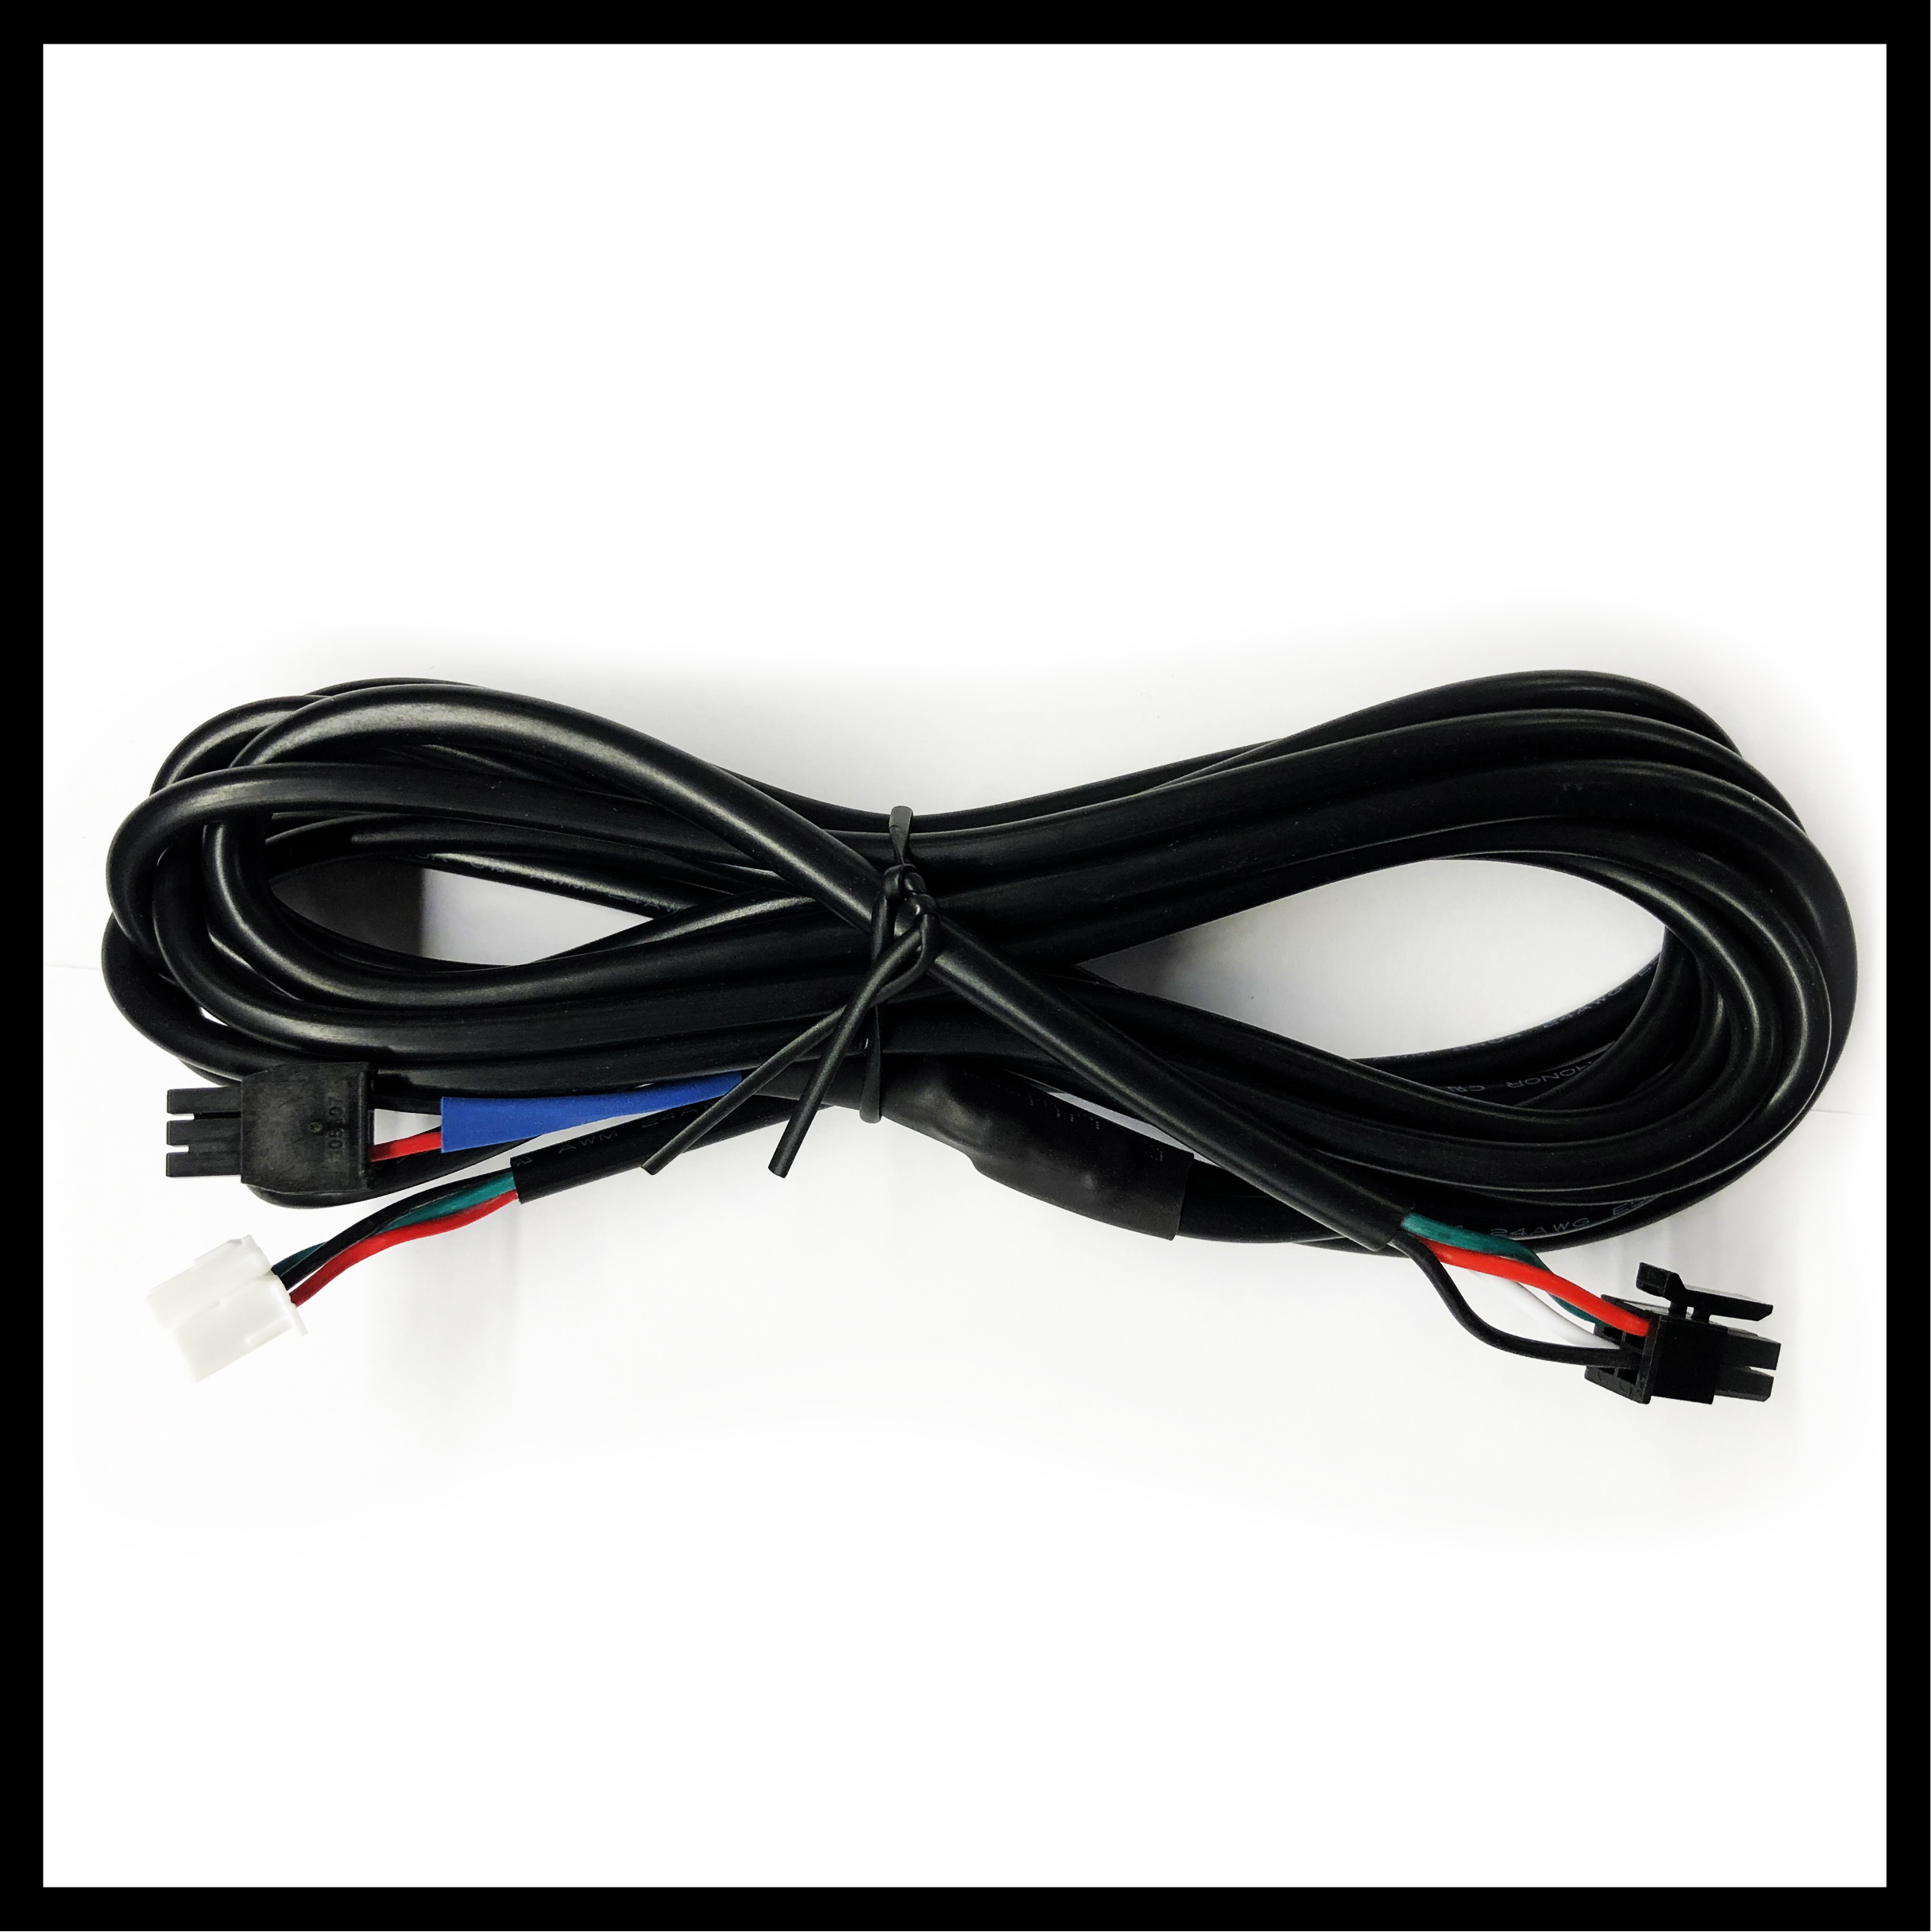 SP-1_Cable_copy.jpg